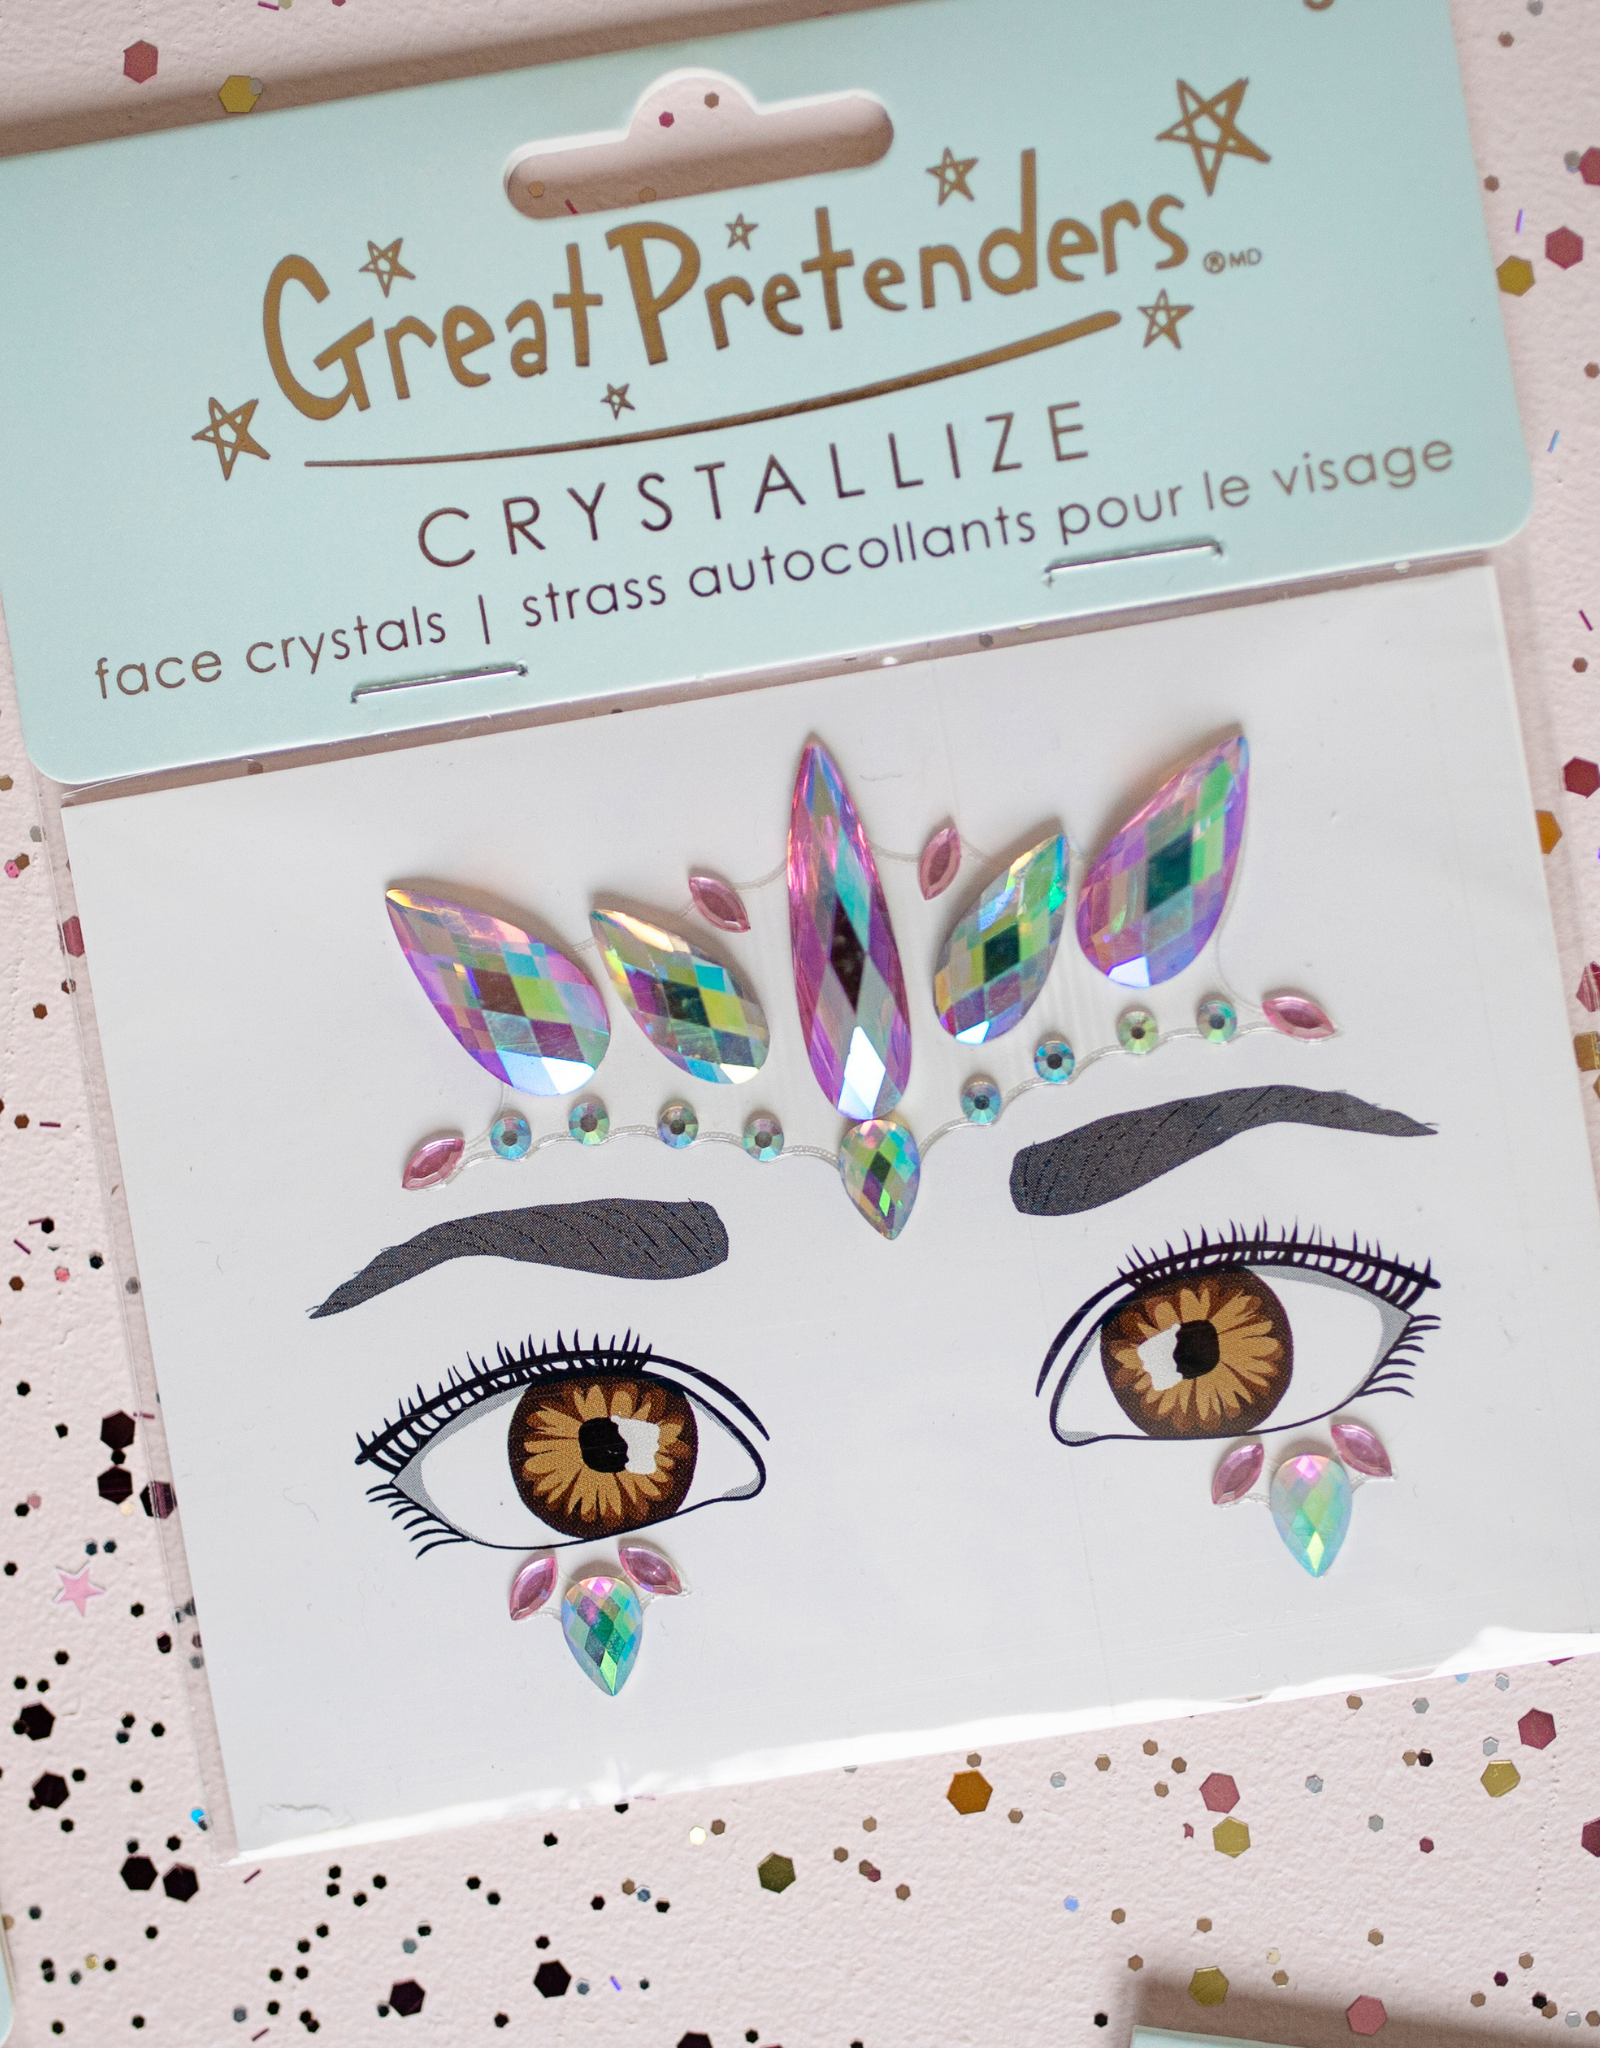 Great Pretenders Face Crystals